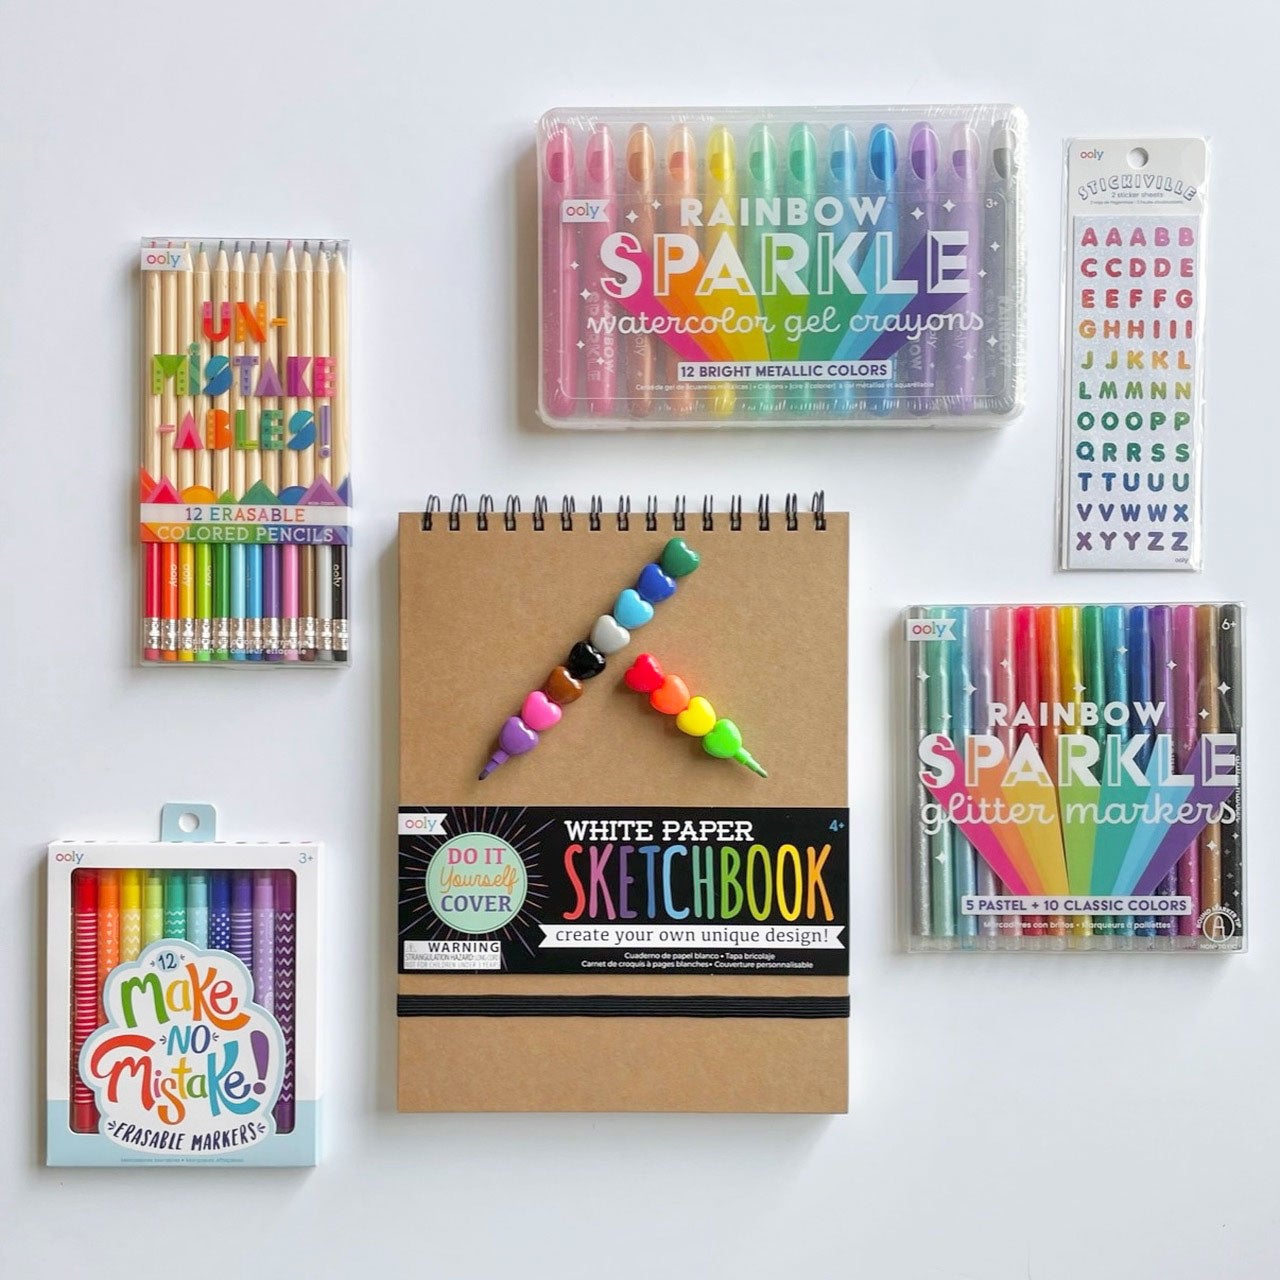 ooly rainbow sparkle glitter markers - Little